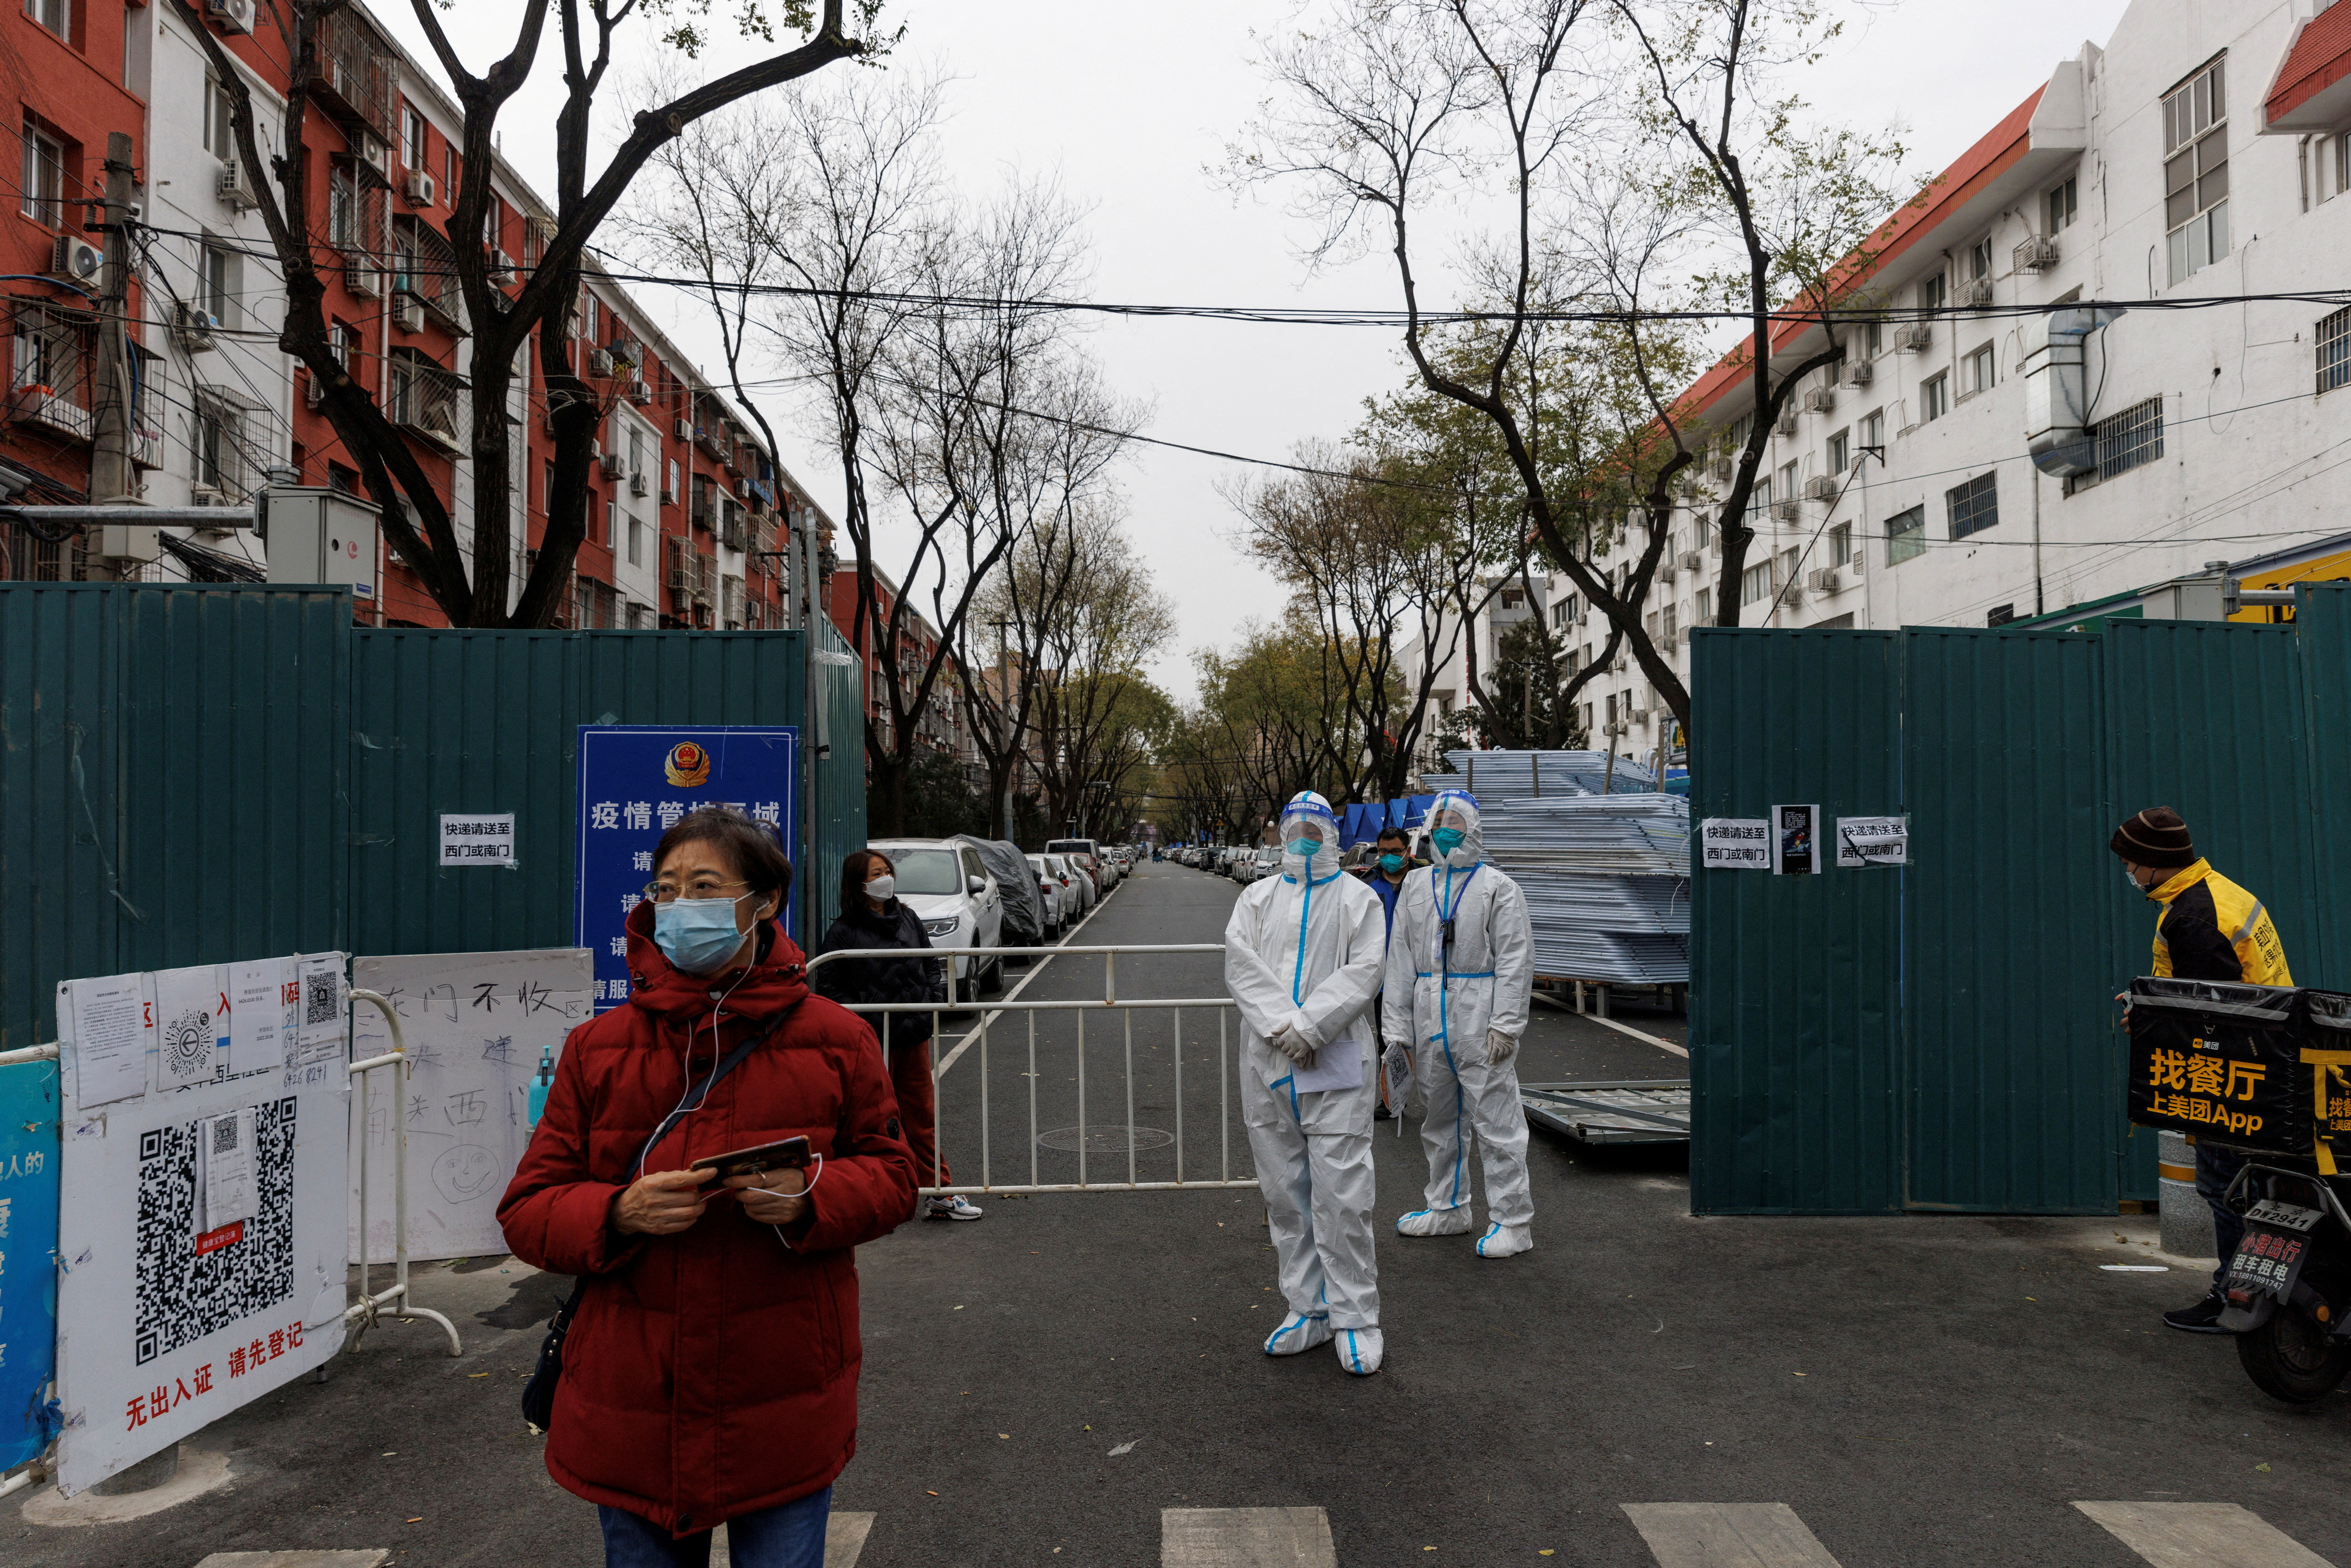 Epidemic-prevention workers in protective suits stand guard at a residential compound as COVID-19 outbreaks continue in Beijing